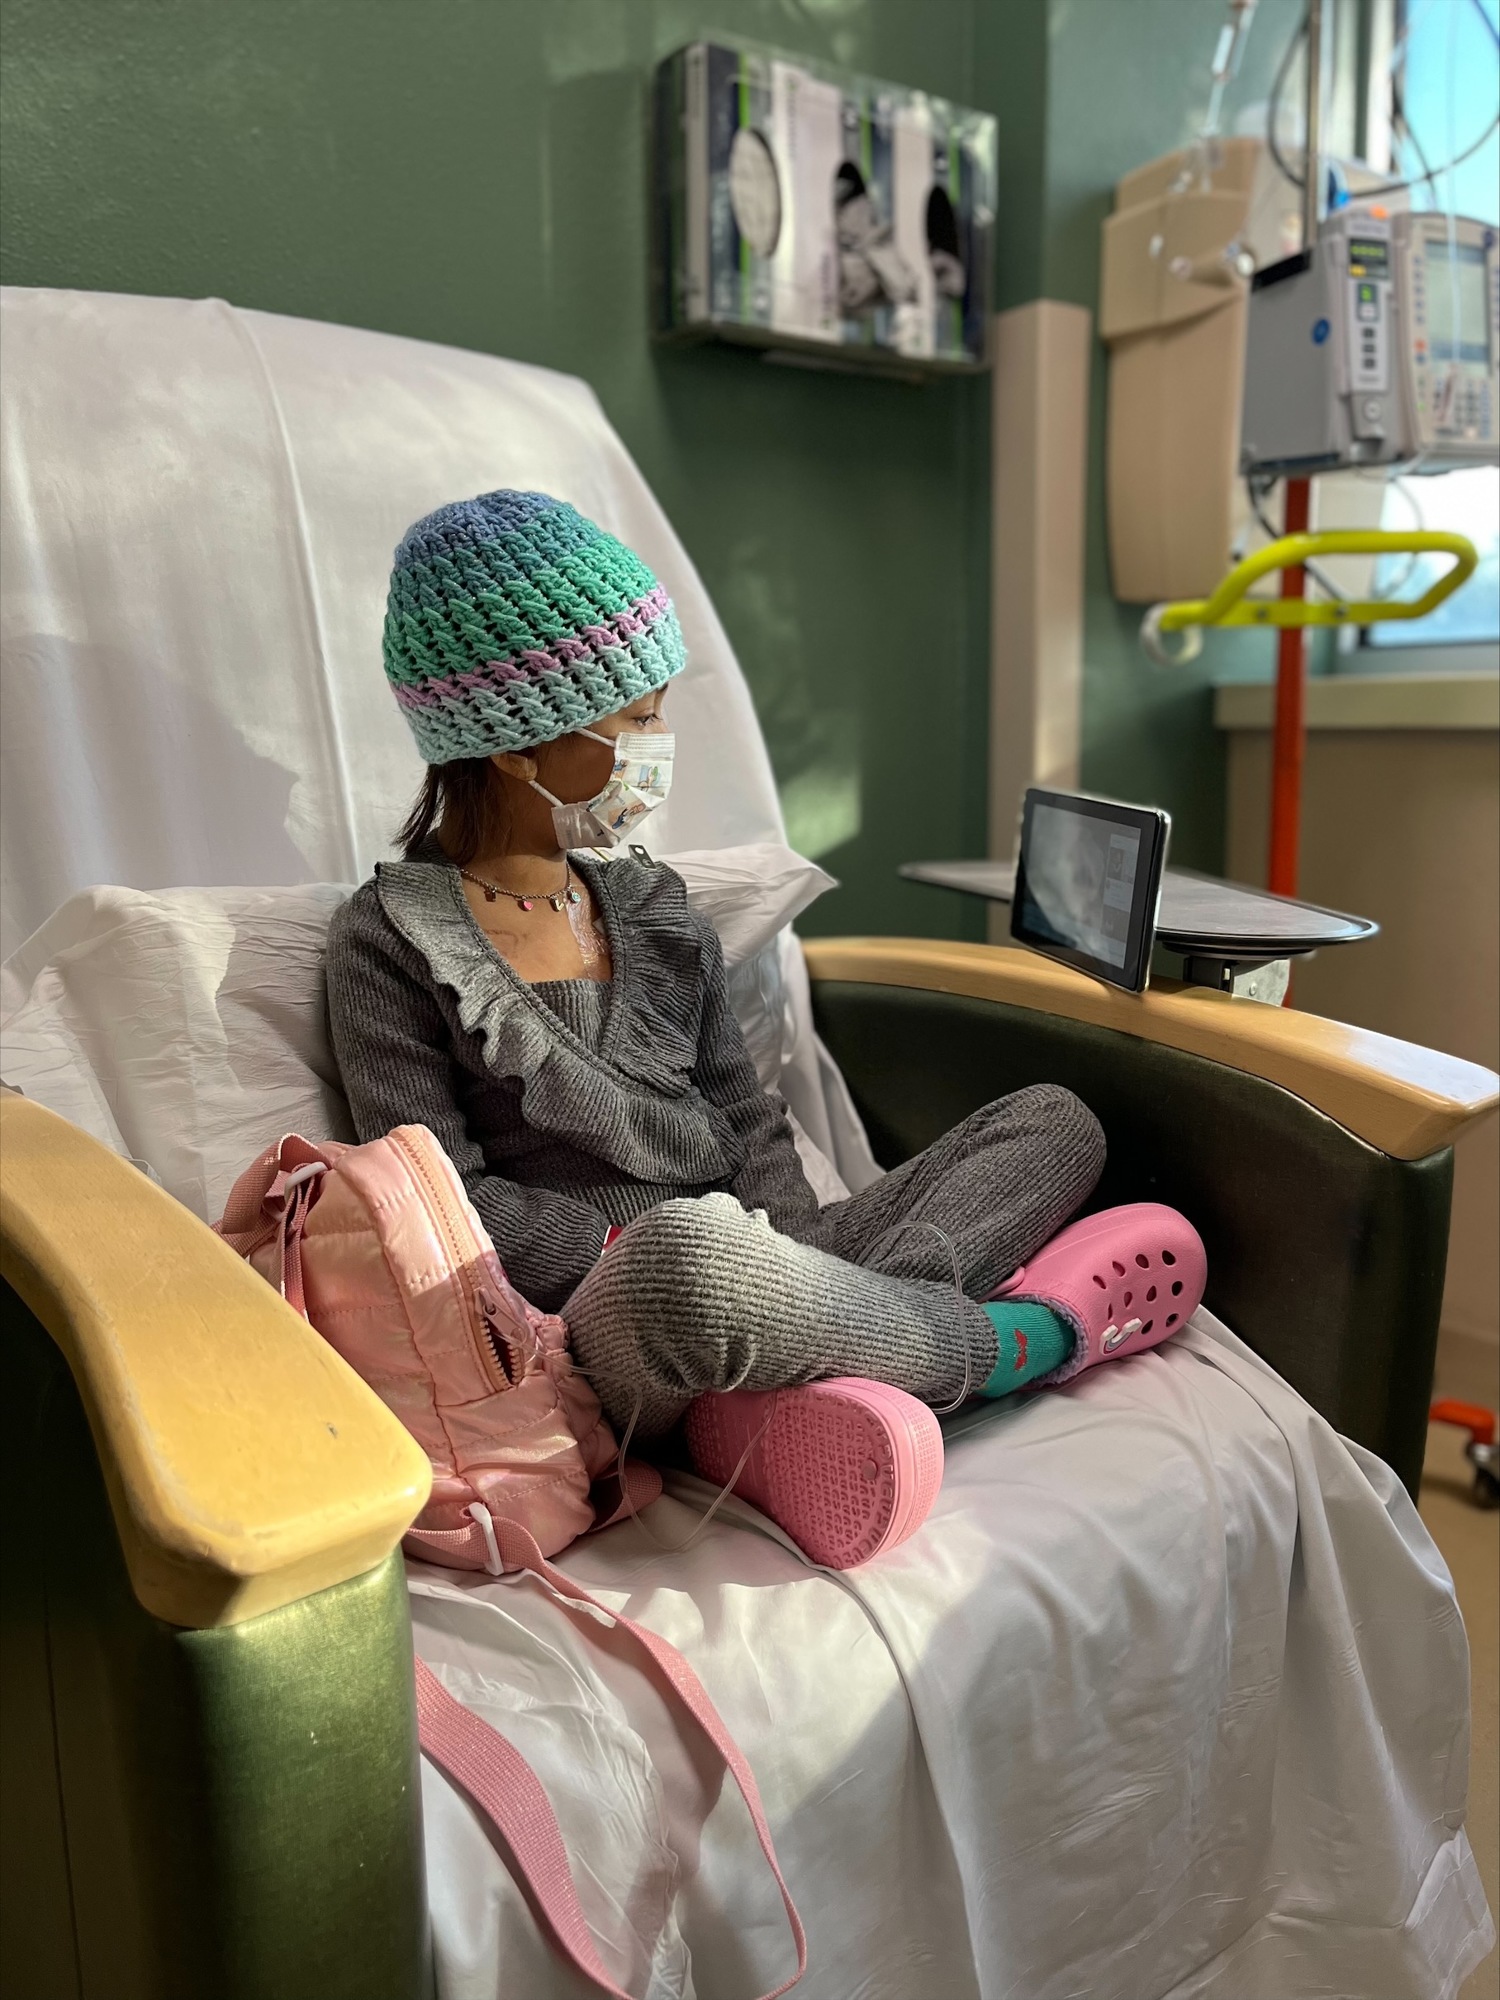 Shows and movies occupy Alena Ramos' time during hospital visits.